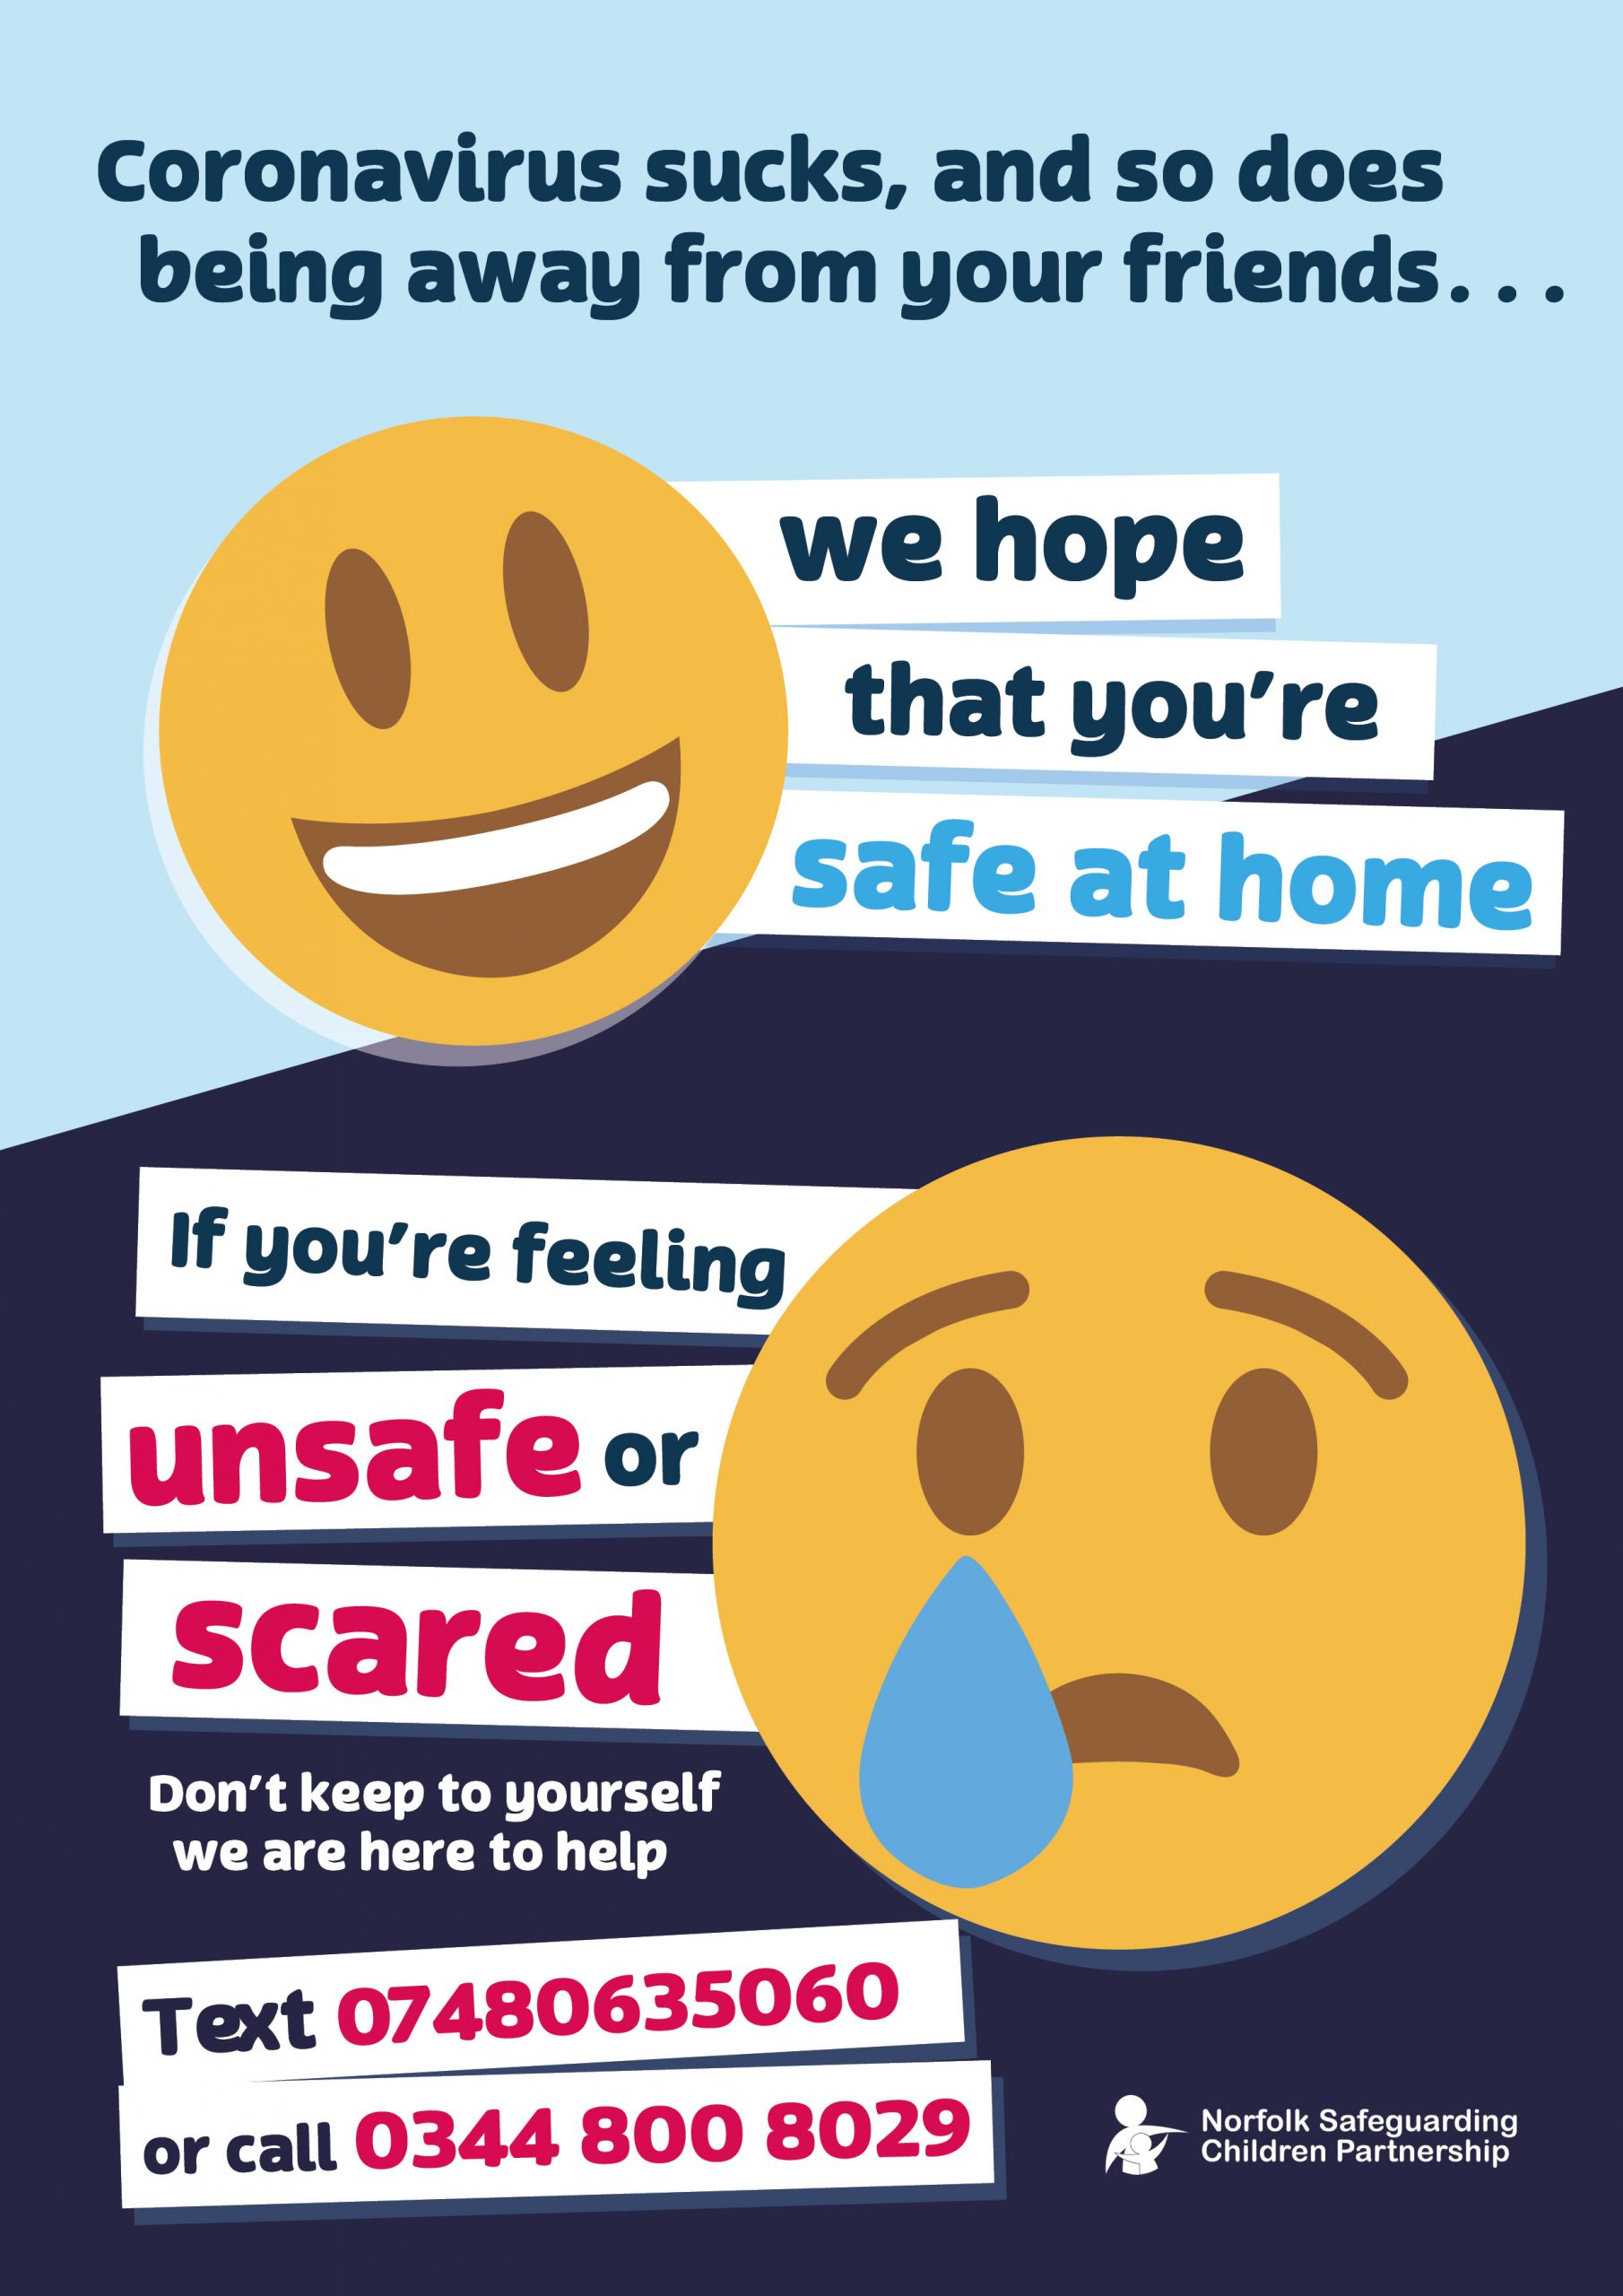 We hope that you’re safe at home…..